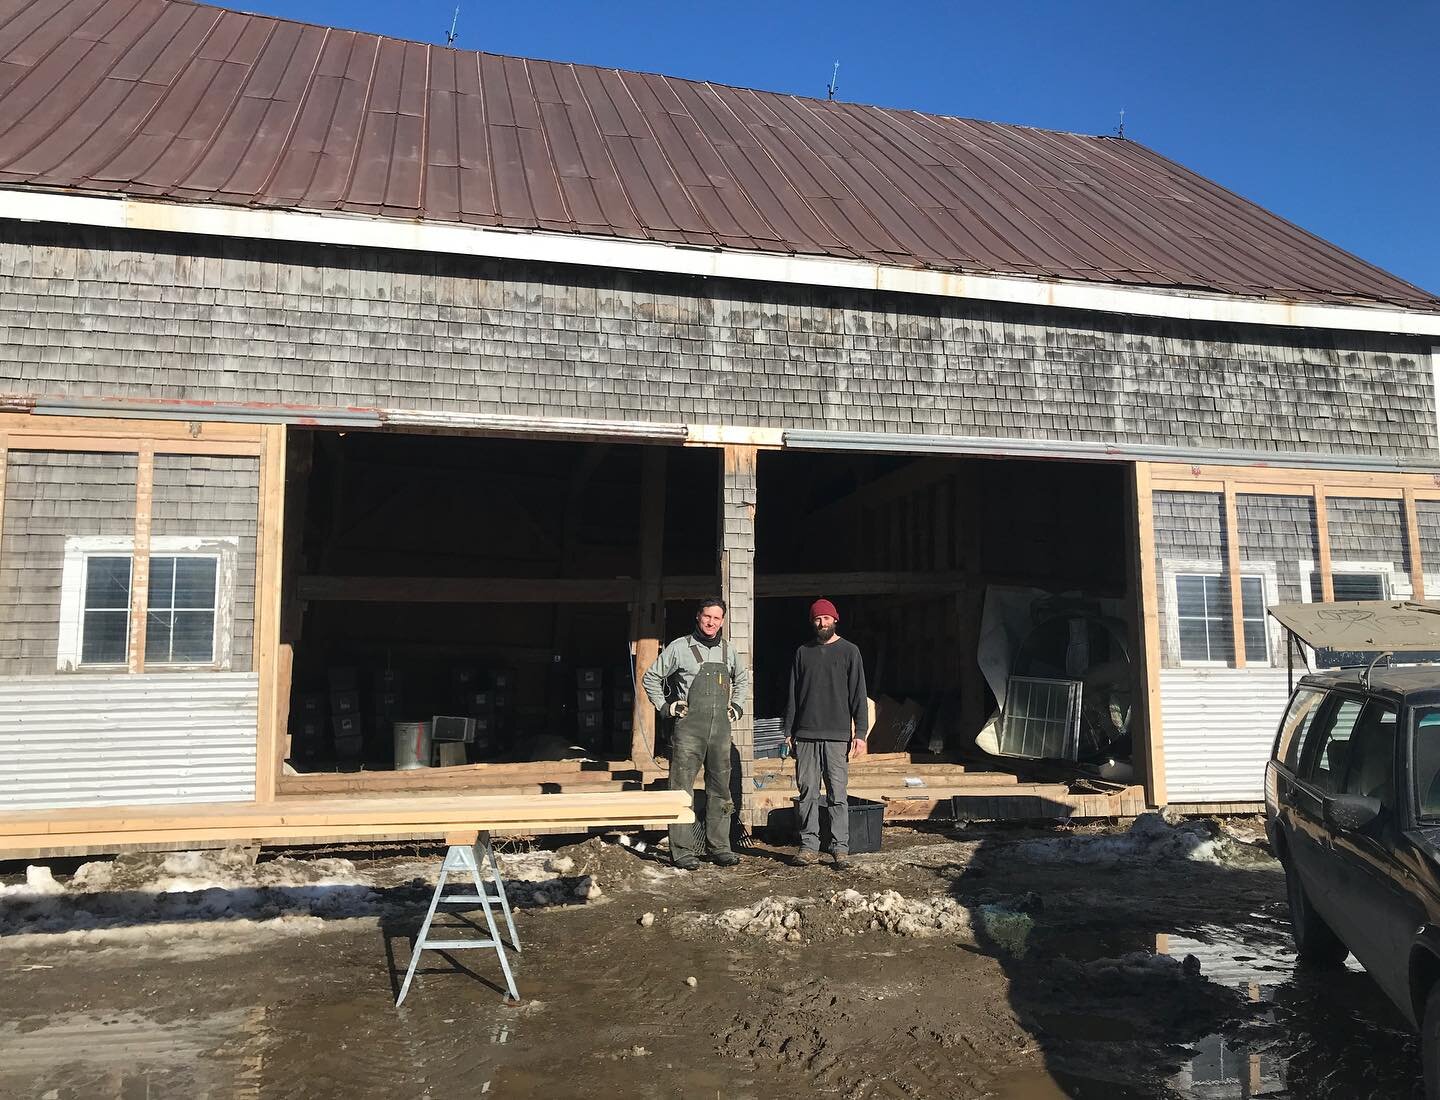 We&rsquo;ve got the springtime get-things-done itch around here and just decided to make a giant hole in the side of the old barn. 

#springfever #gettingantsy #readytowork #oldbarn #oldmainebarns #mainebarns #makingimprovements #timetogetstuffdone #